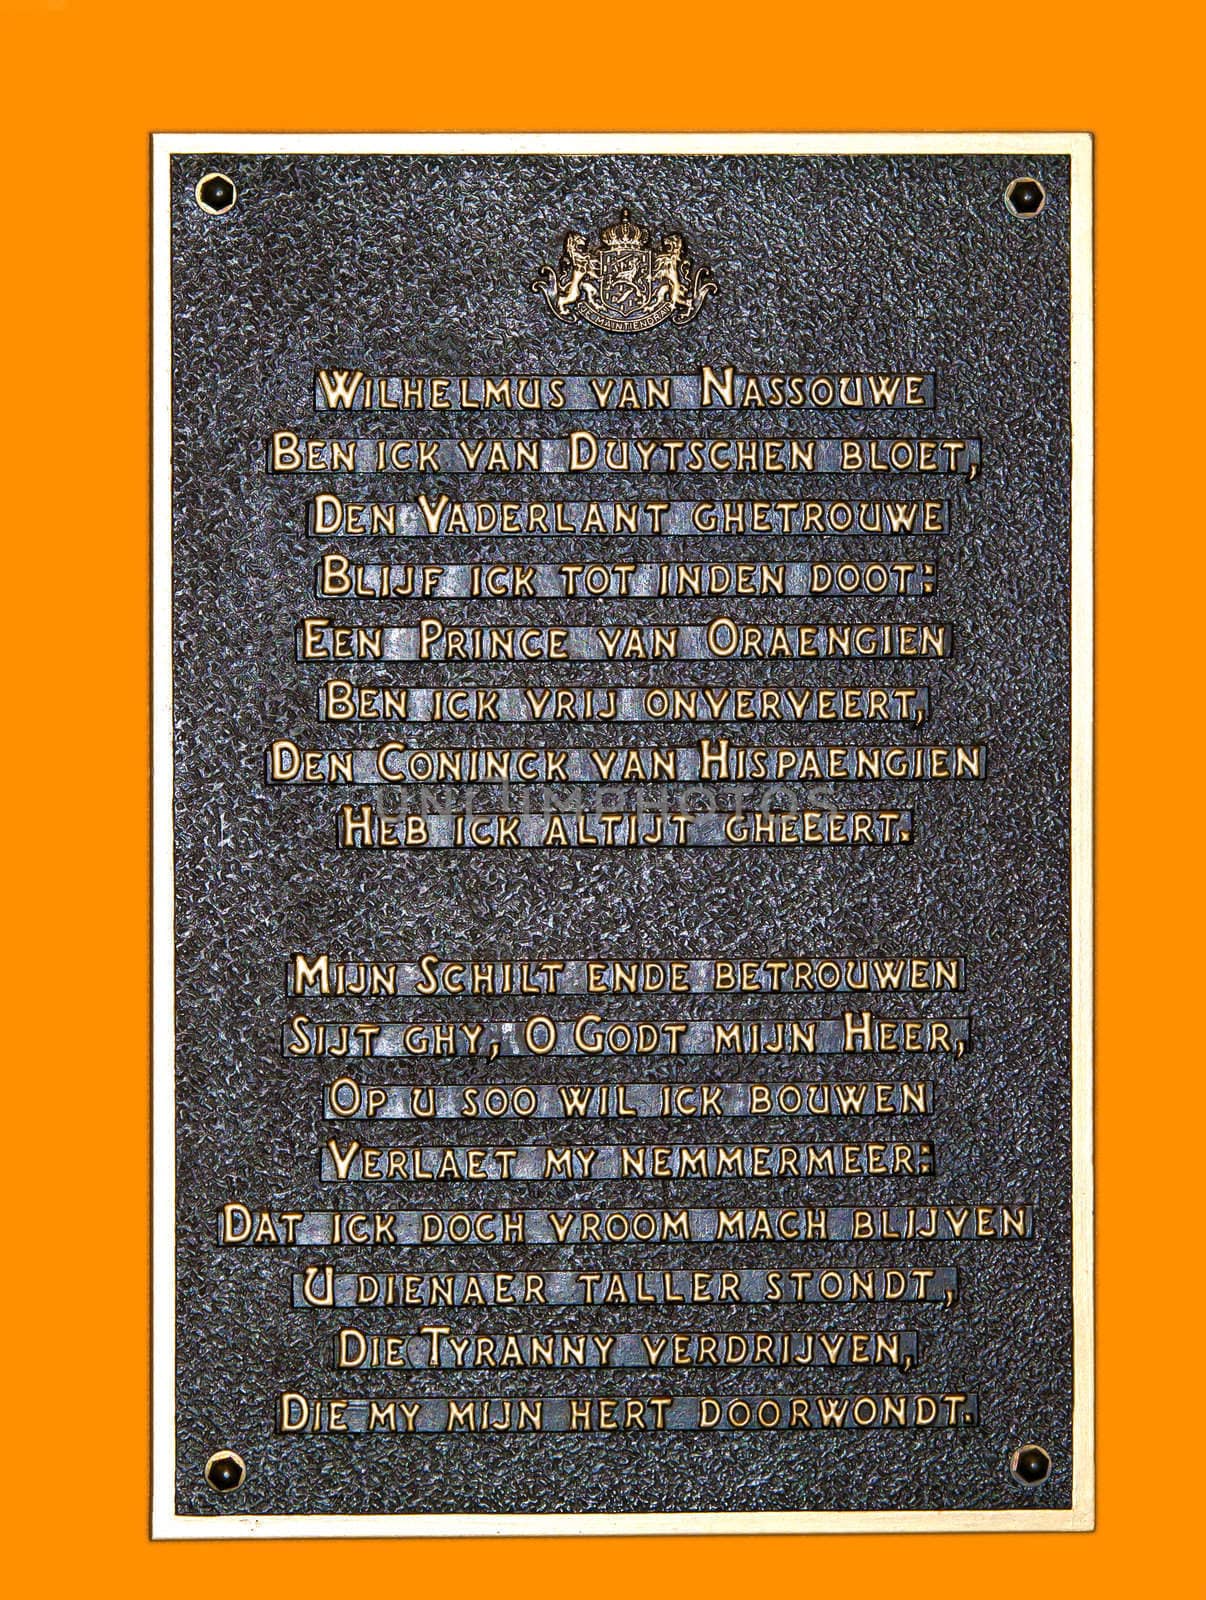 Dutch national anthem at an antique plate with an orange background